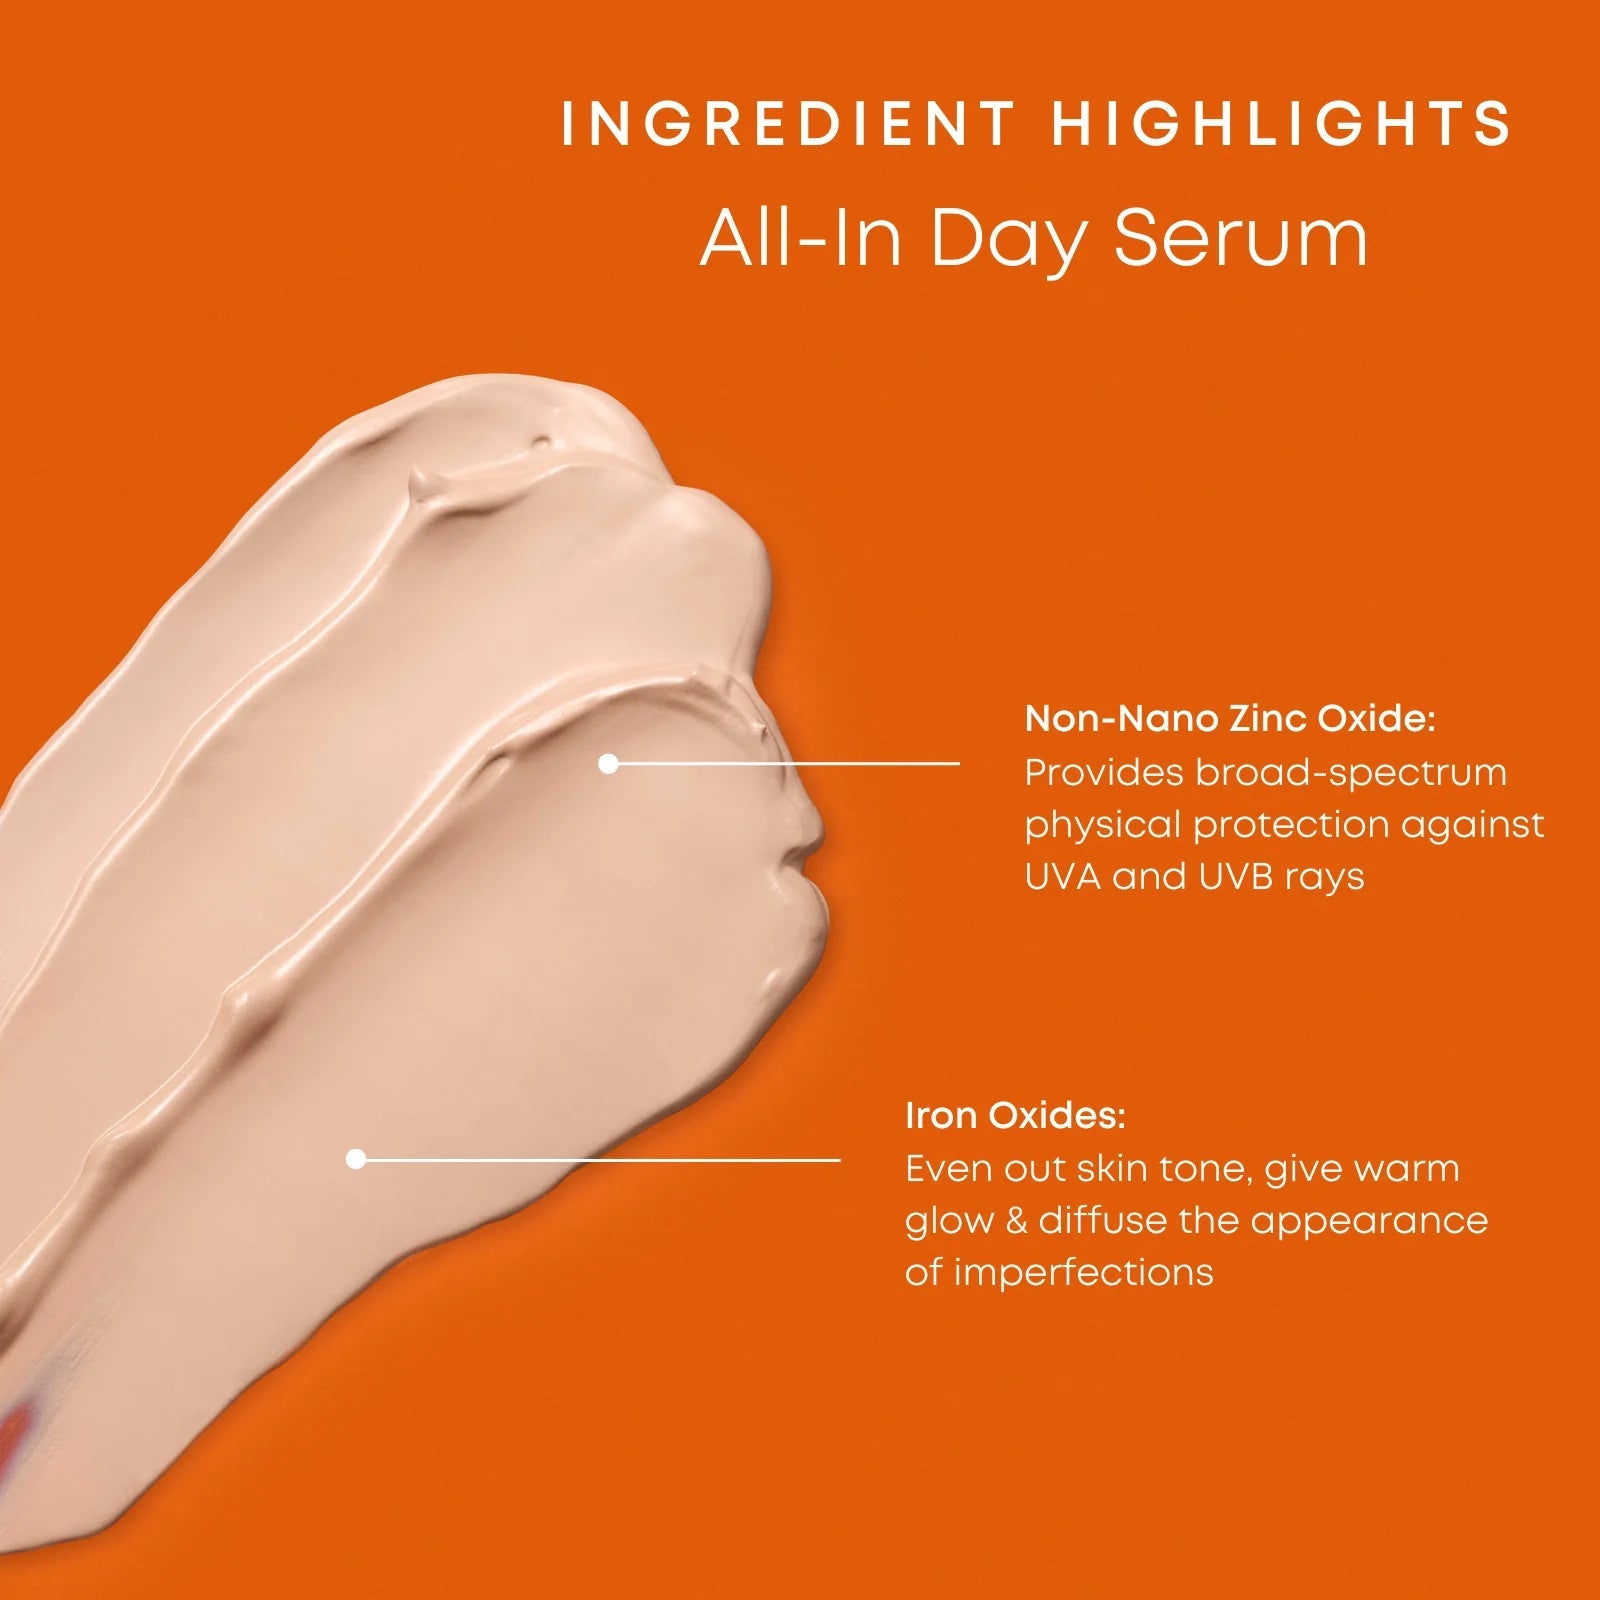 ALL-IN DAY SERUM - 35 Thousand